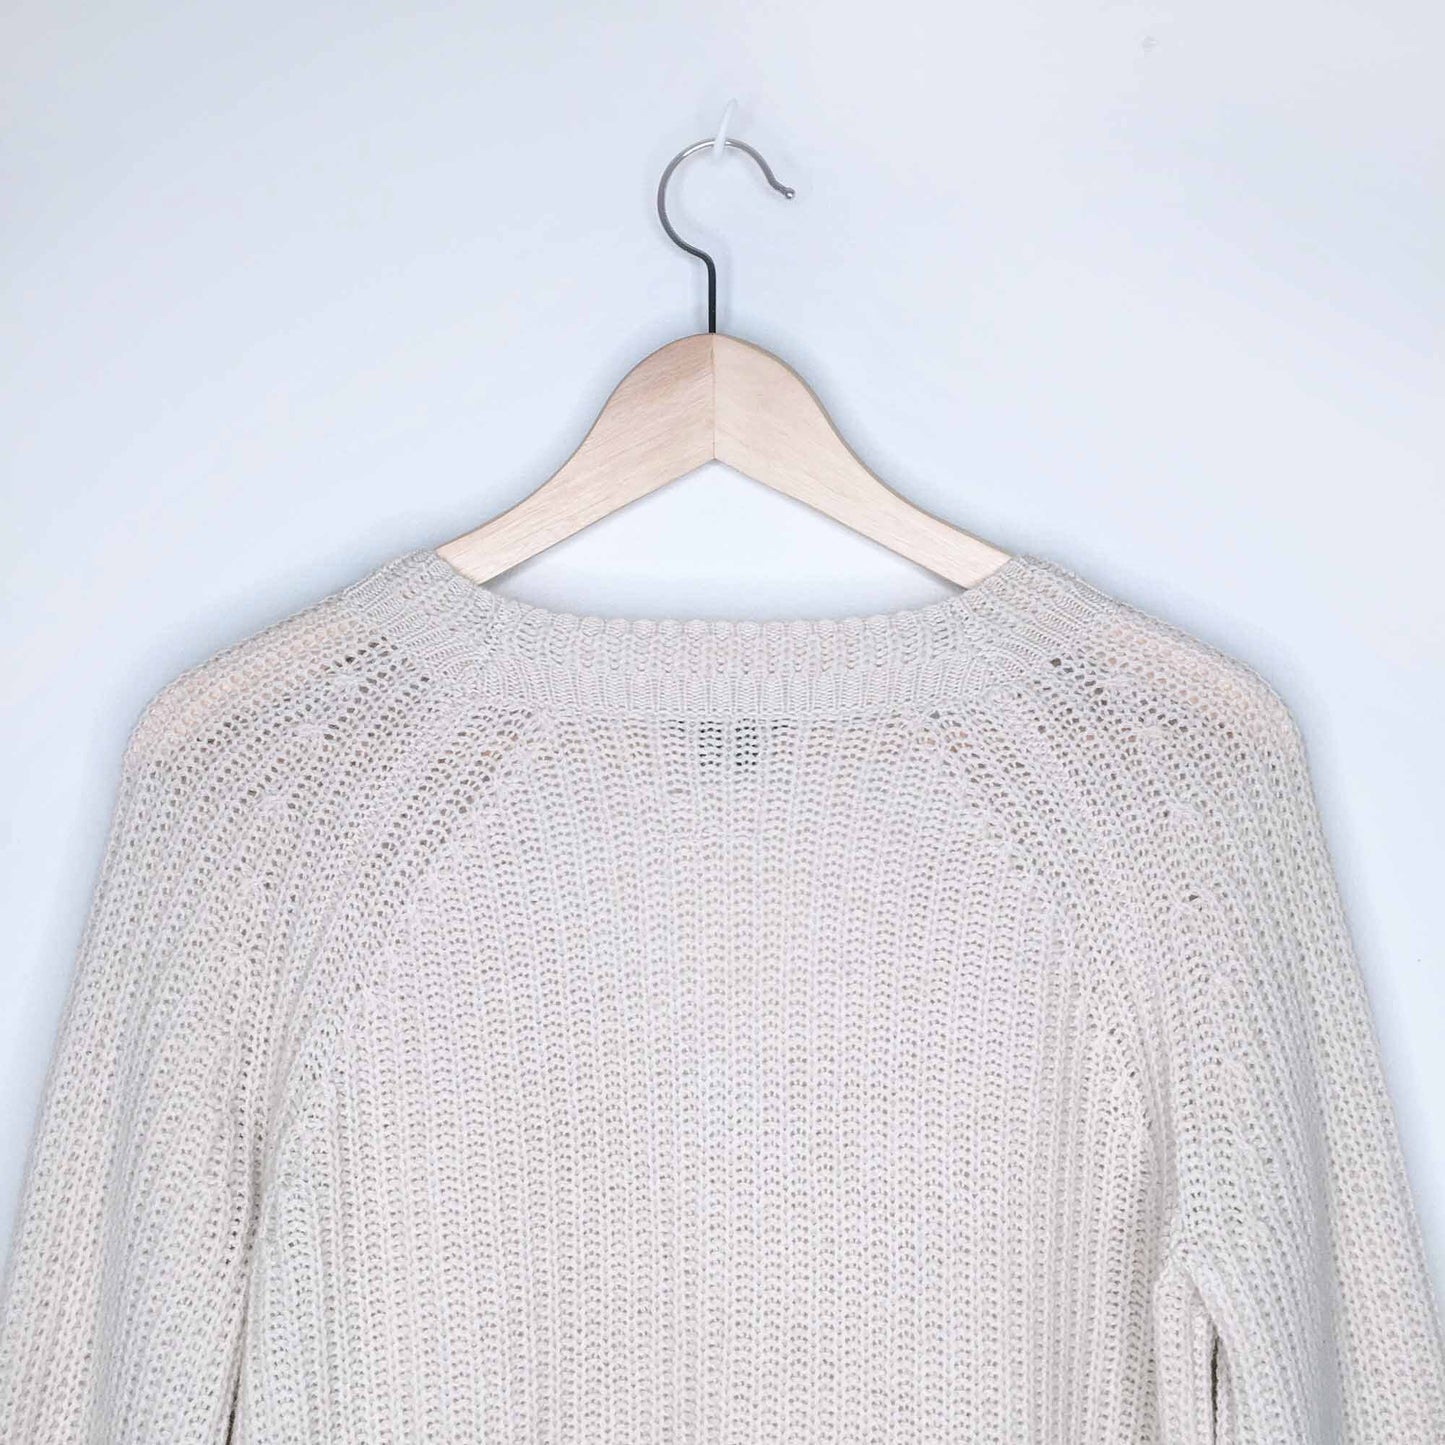 Theory 100% cashmere v-neck ribbed knit sweater - size Small